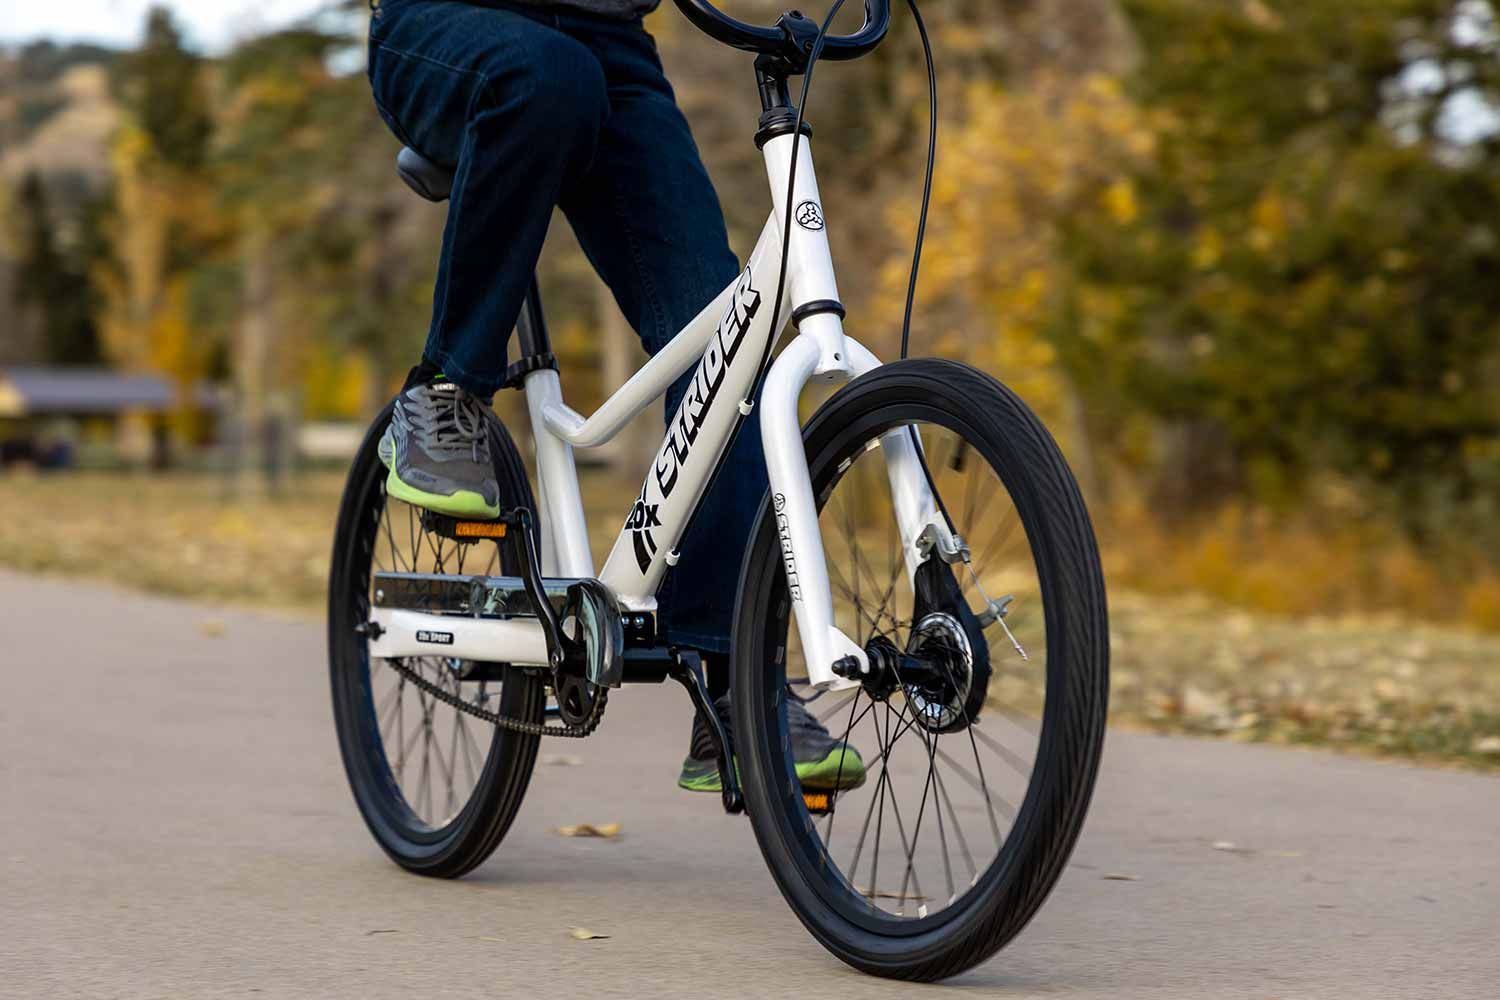 A rider pedaling the Strider 20x Sport, a 20" all-in-one balance and pedal bike